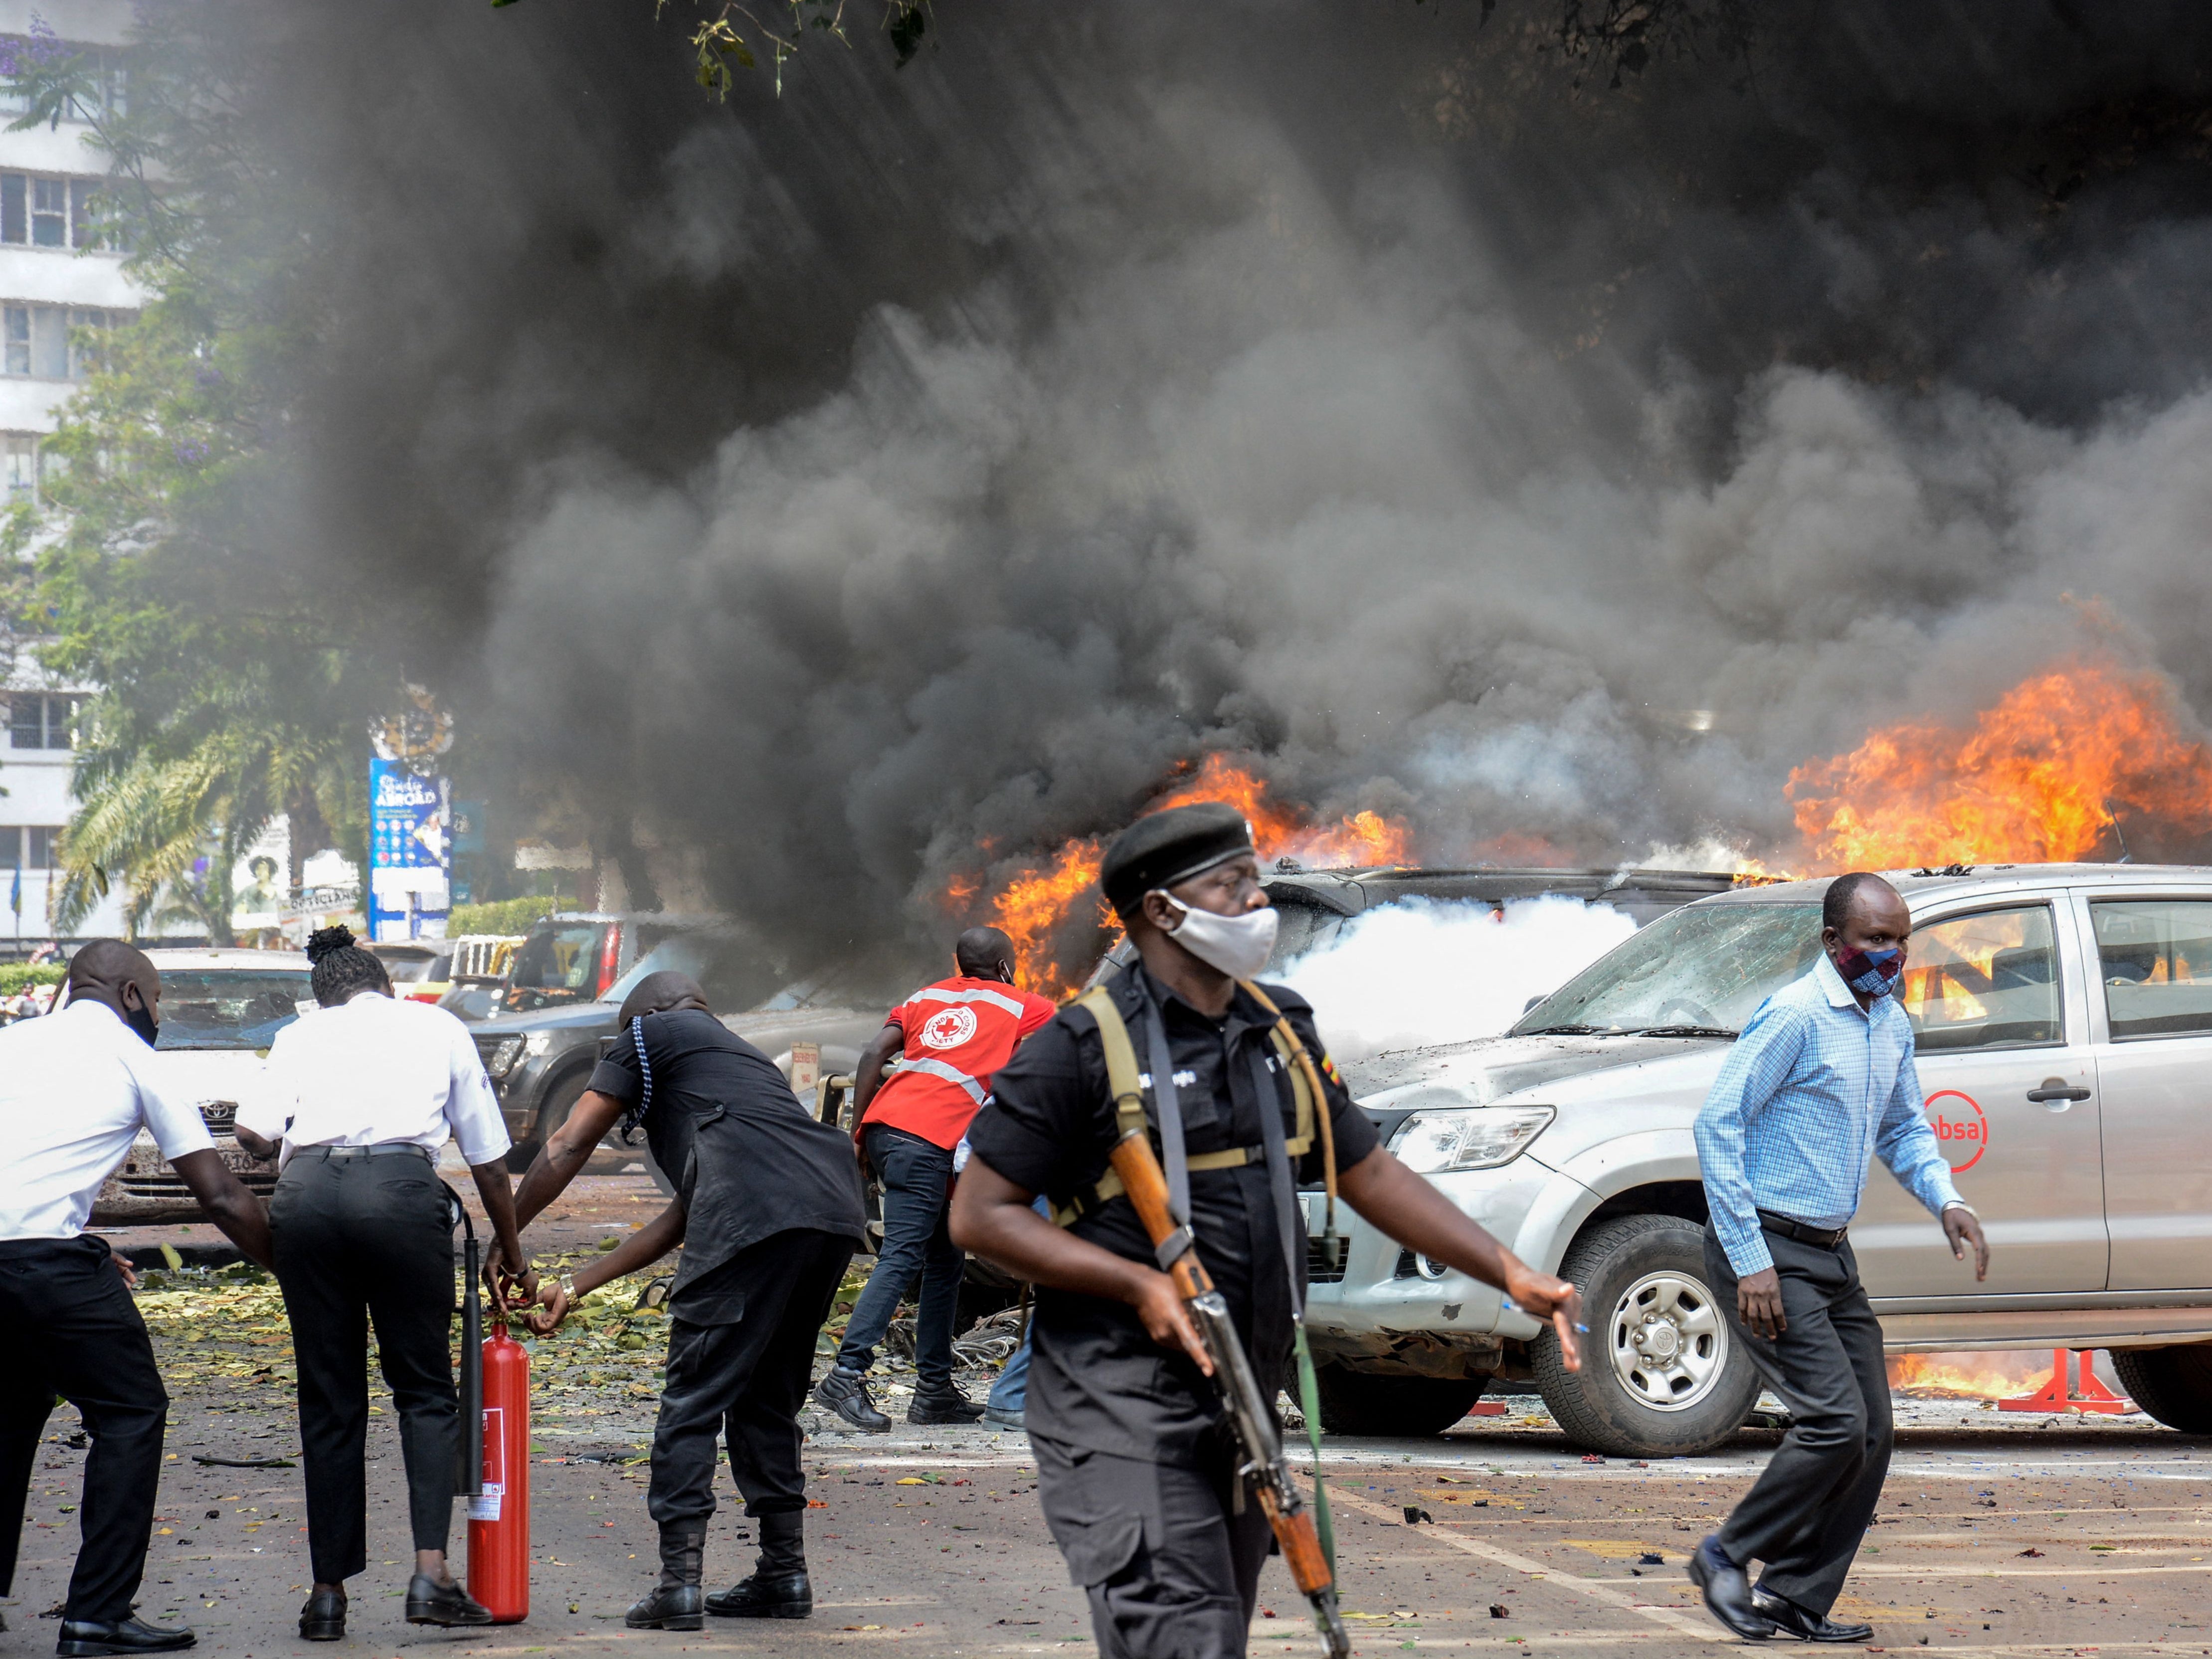 Suicide bombers on motorbikes caused an explosion near the parliament